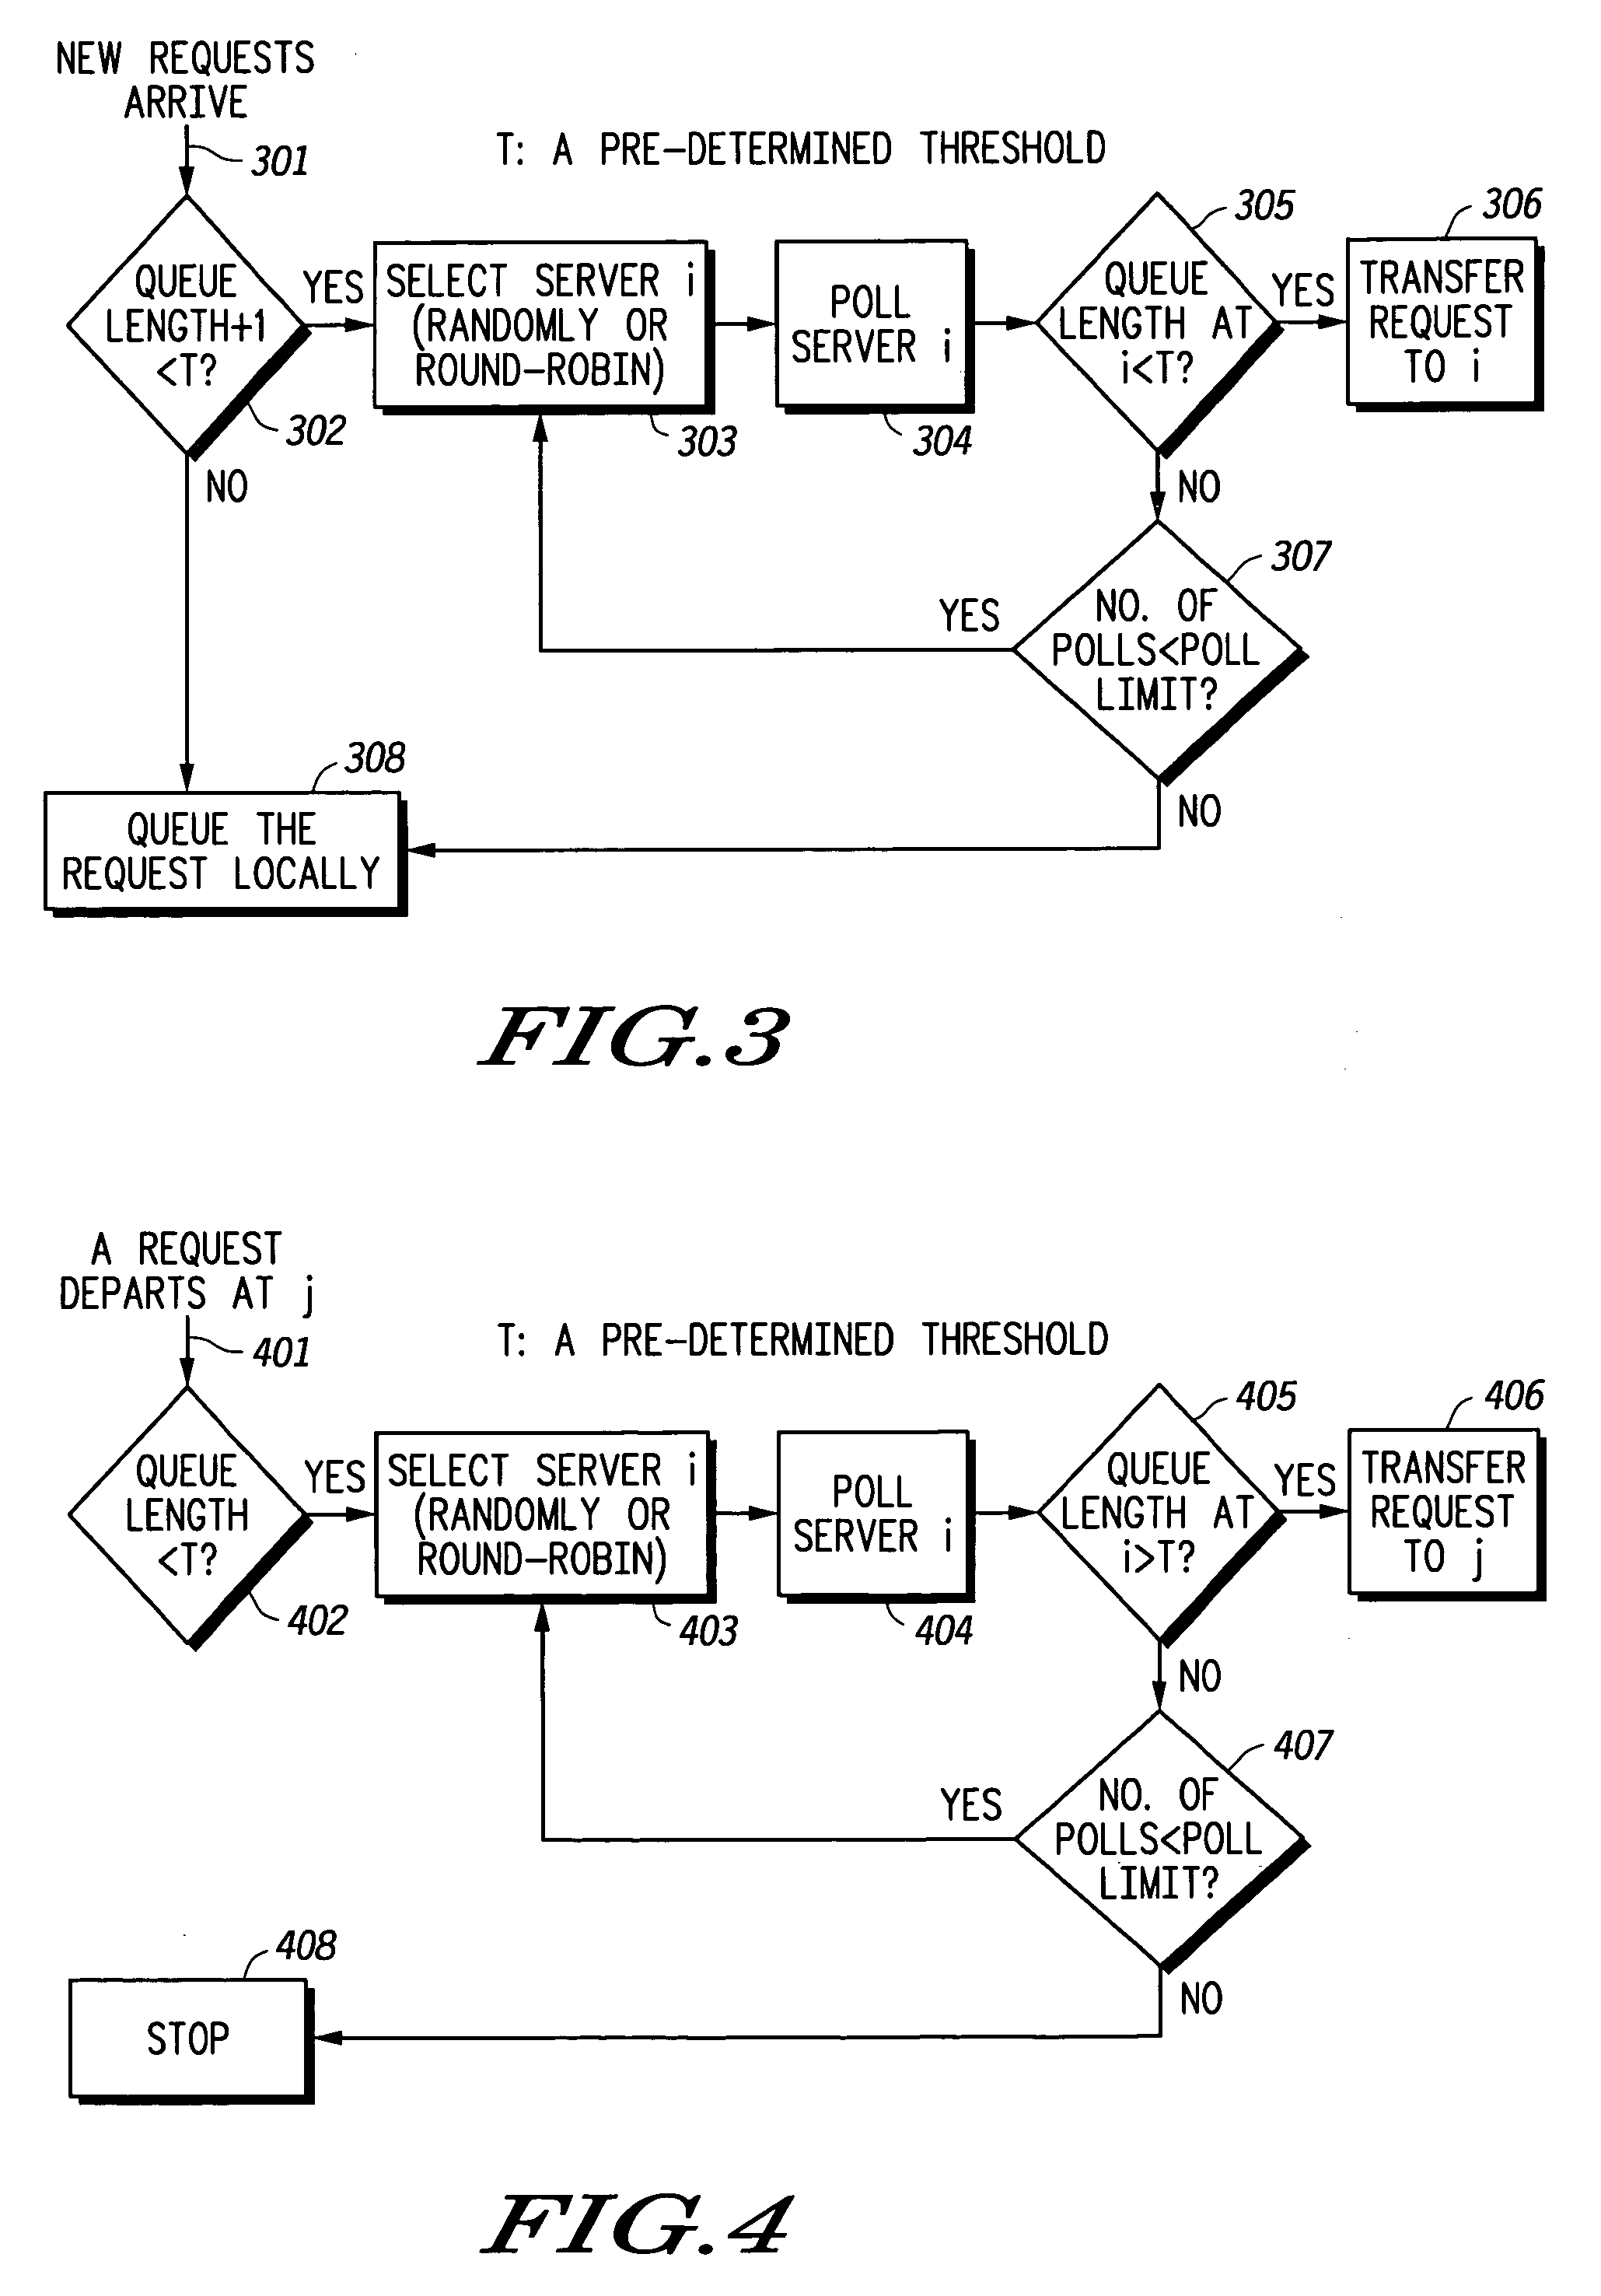 Load balancing method in a communication network